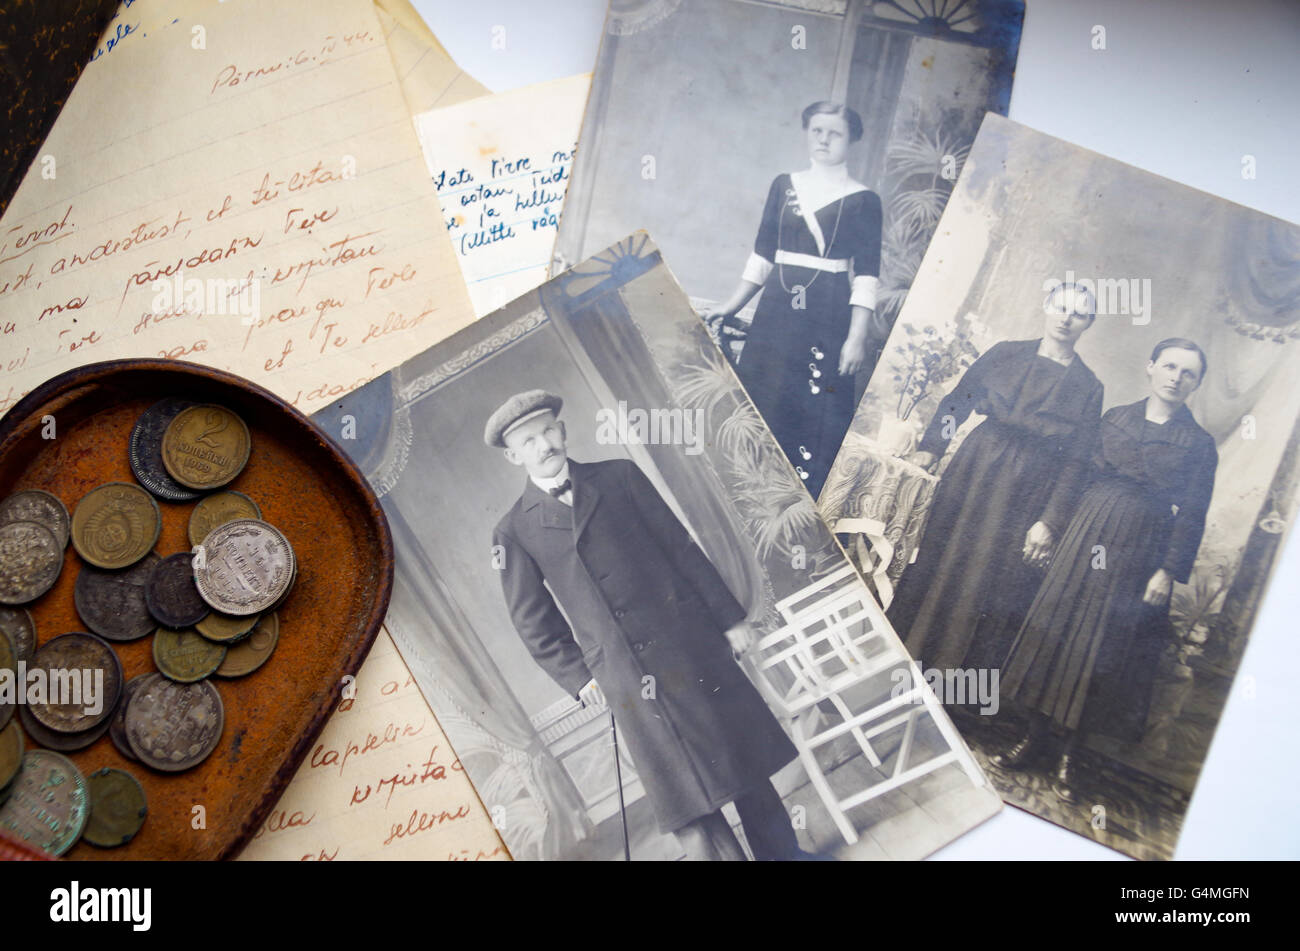 Old coins from the Russian Empire, handwritten love letters from the 2nd World War era and several old b&w family photos Stock Photo